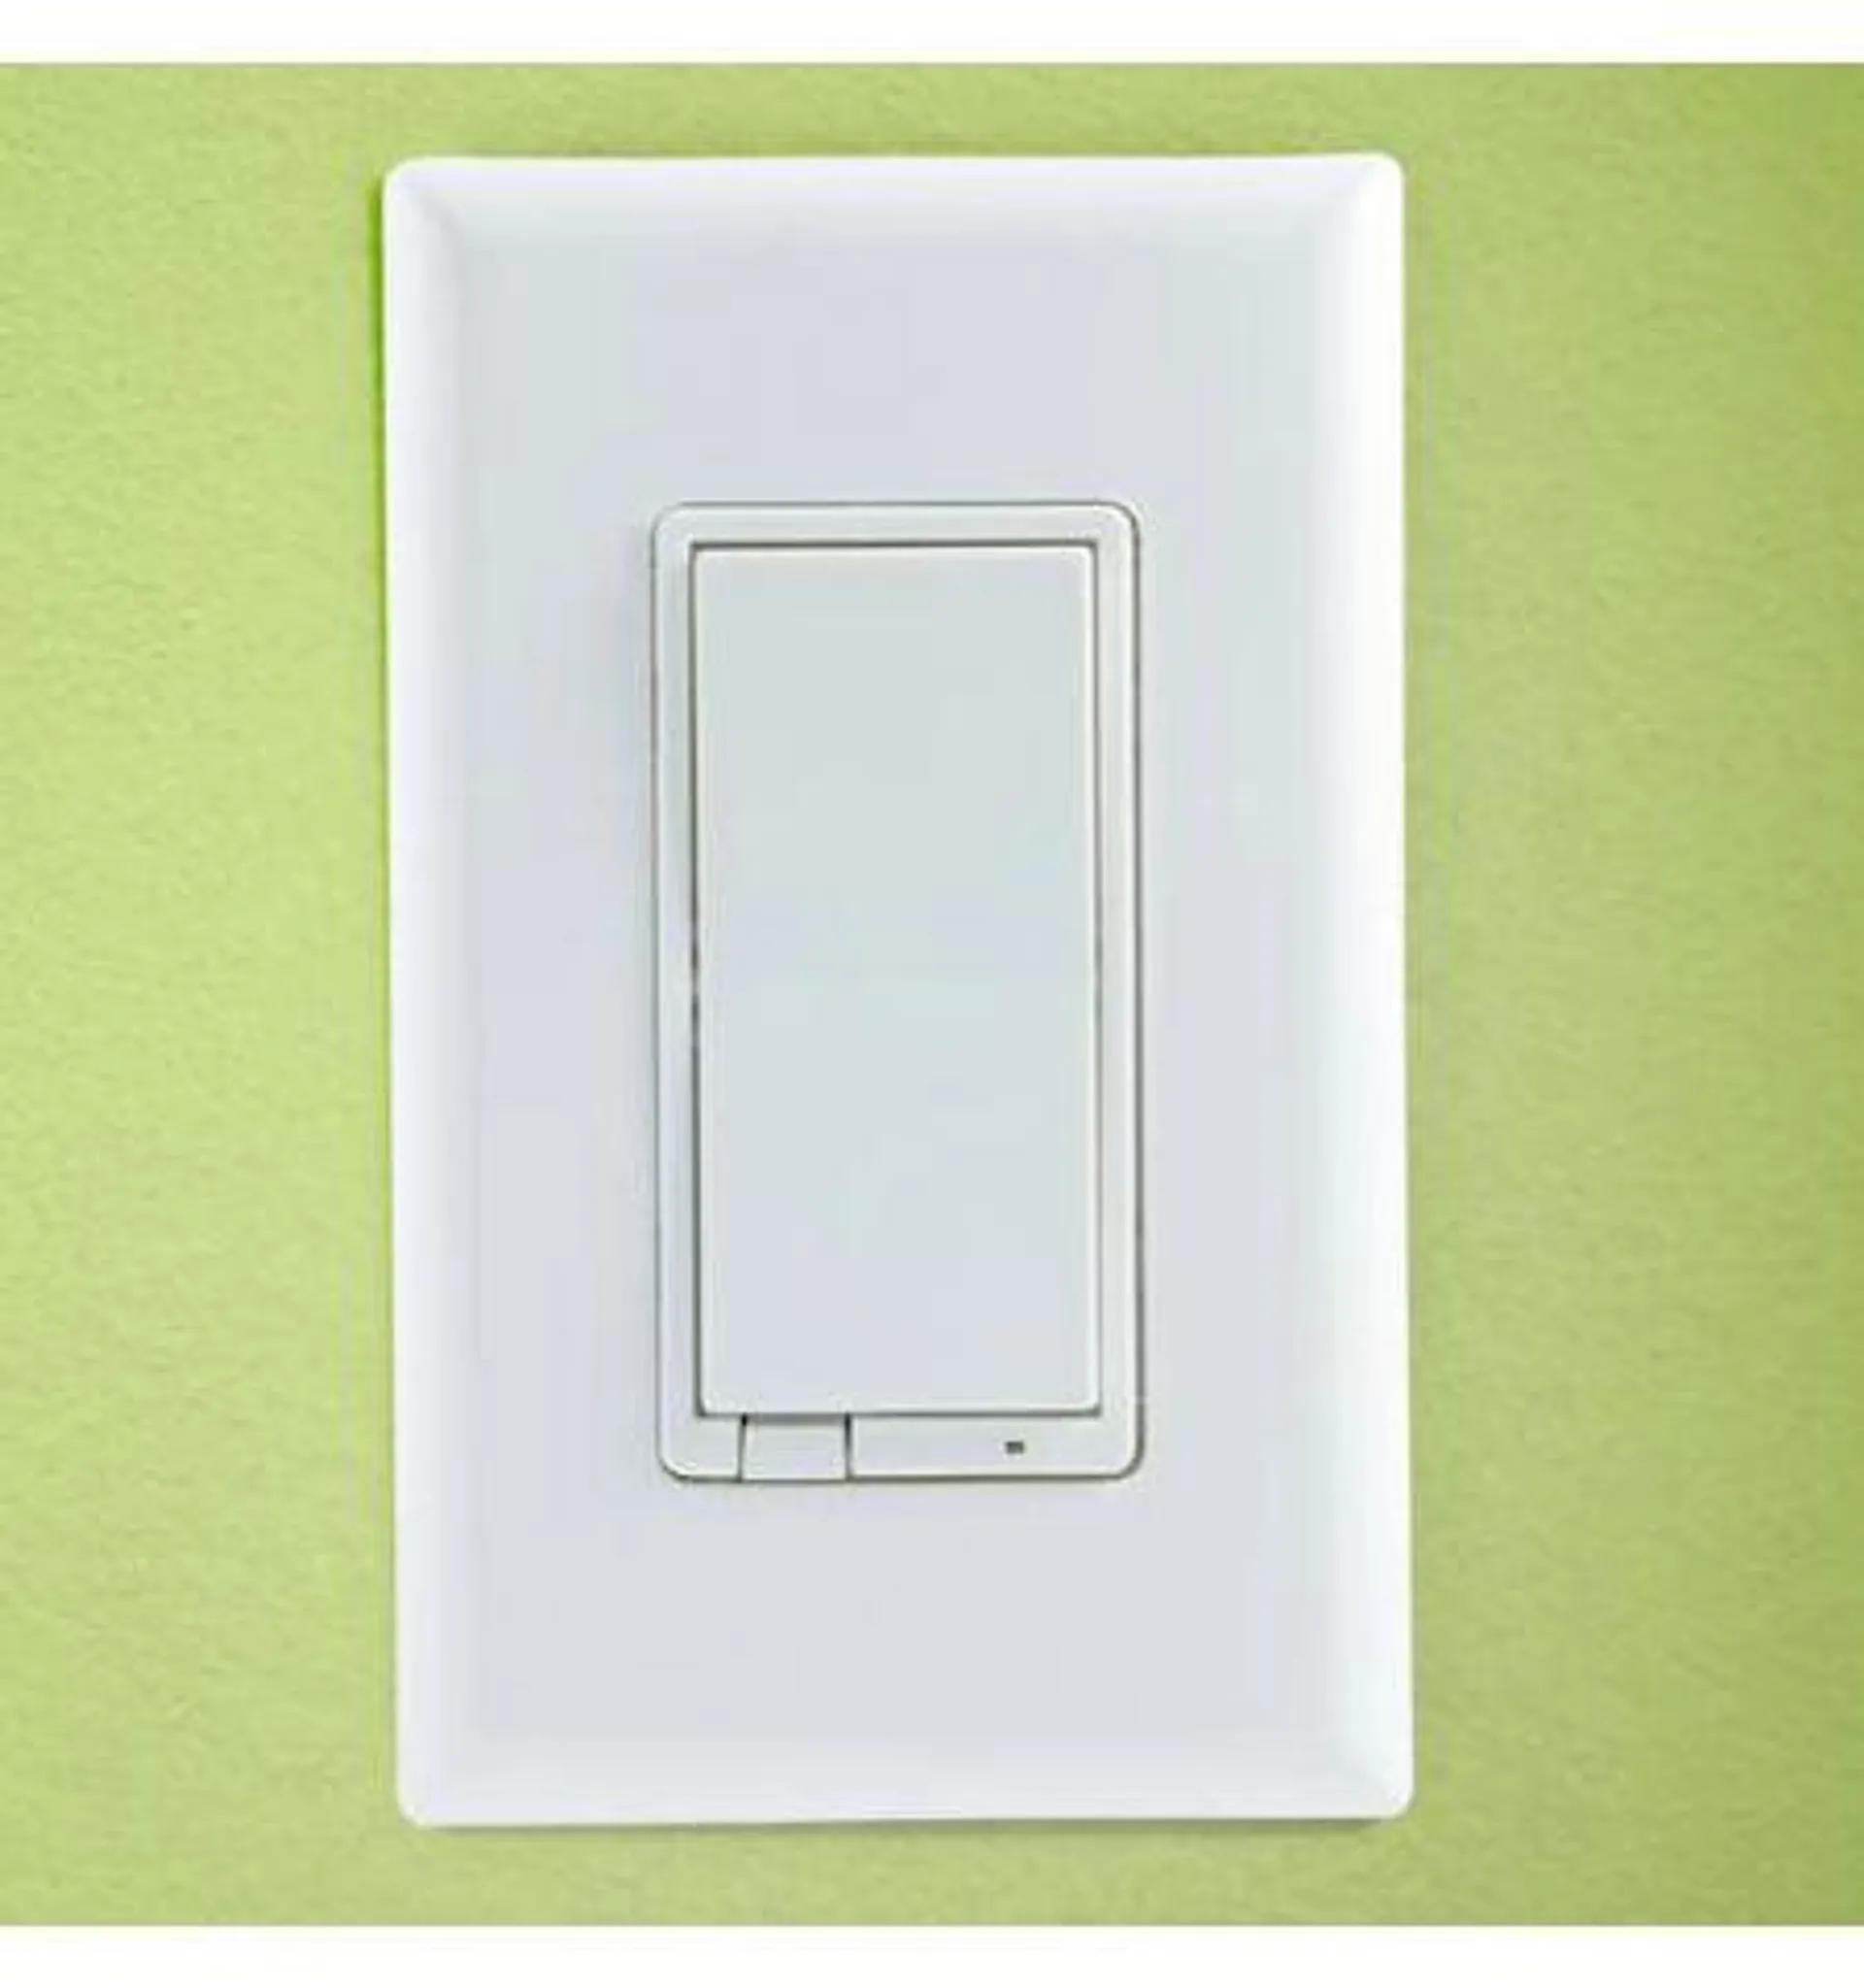 GE In-Wall Smart Dimmer Switch